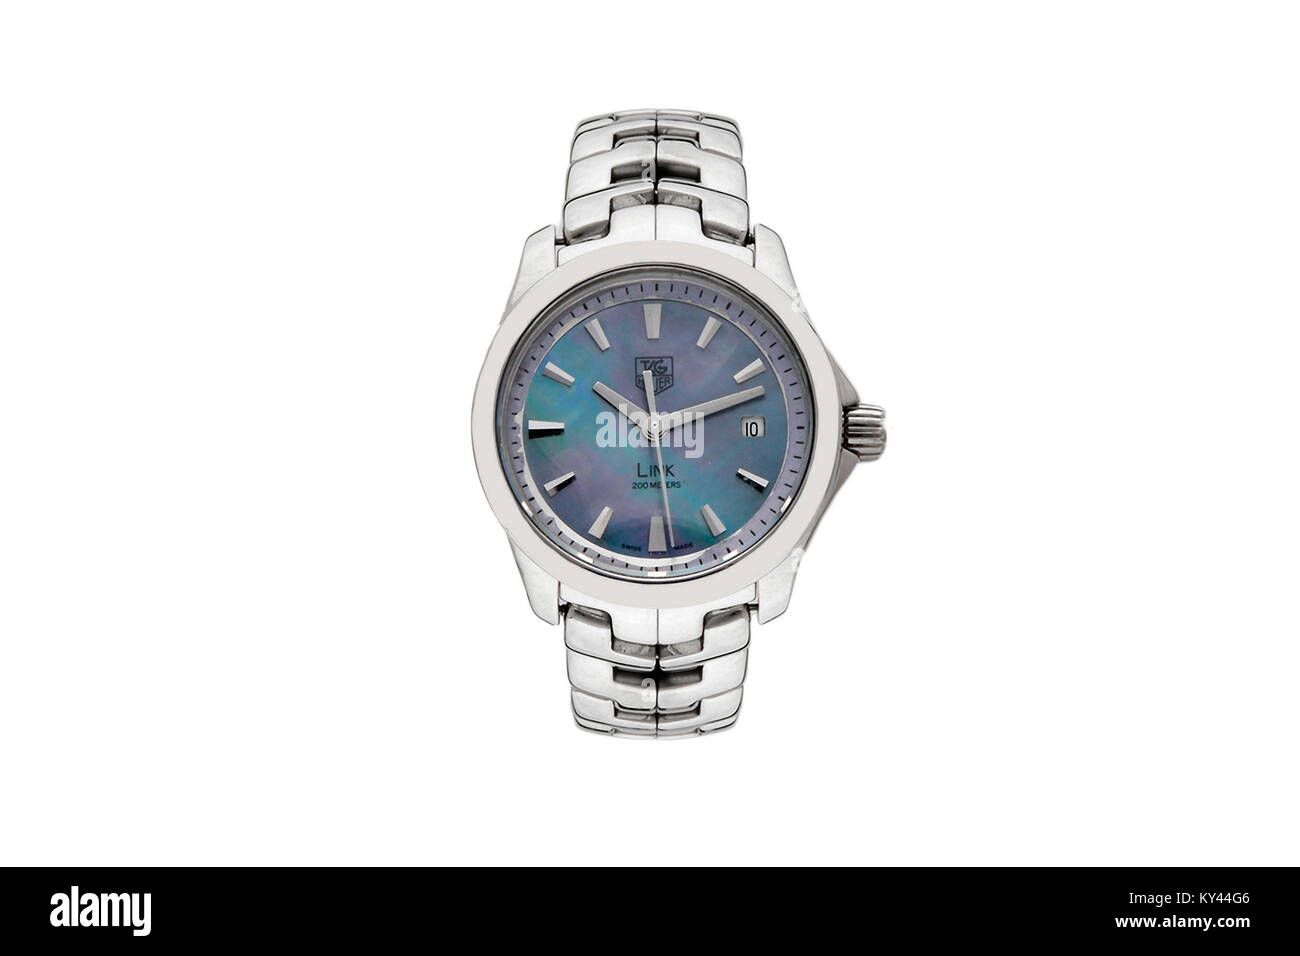 Tag Heuer Link stainless steel man's watch with blue face Stock Photo